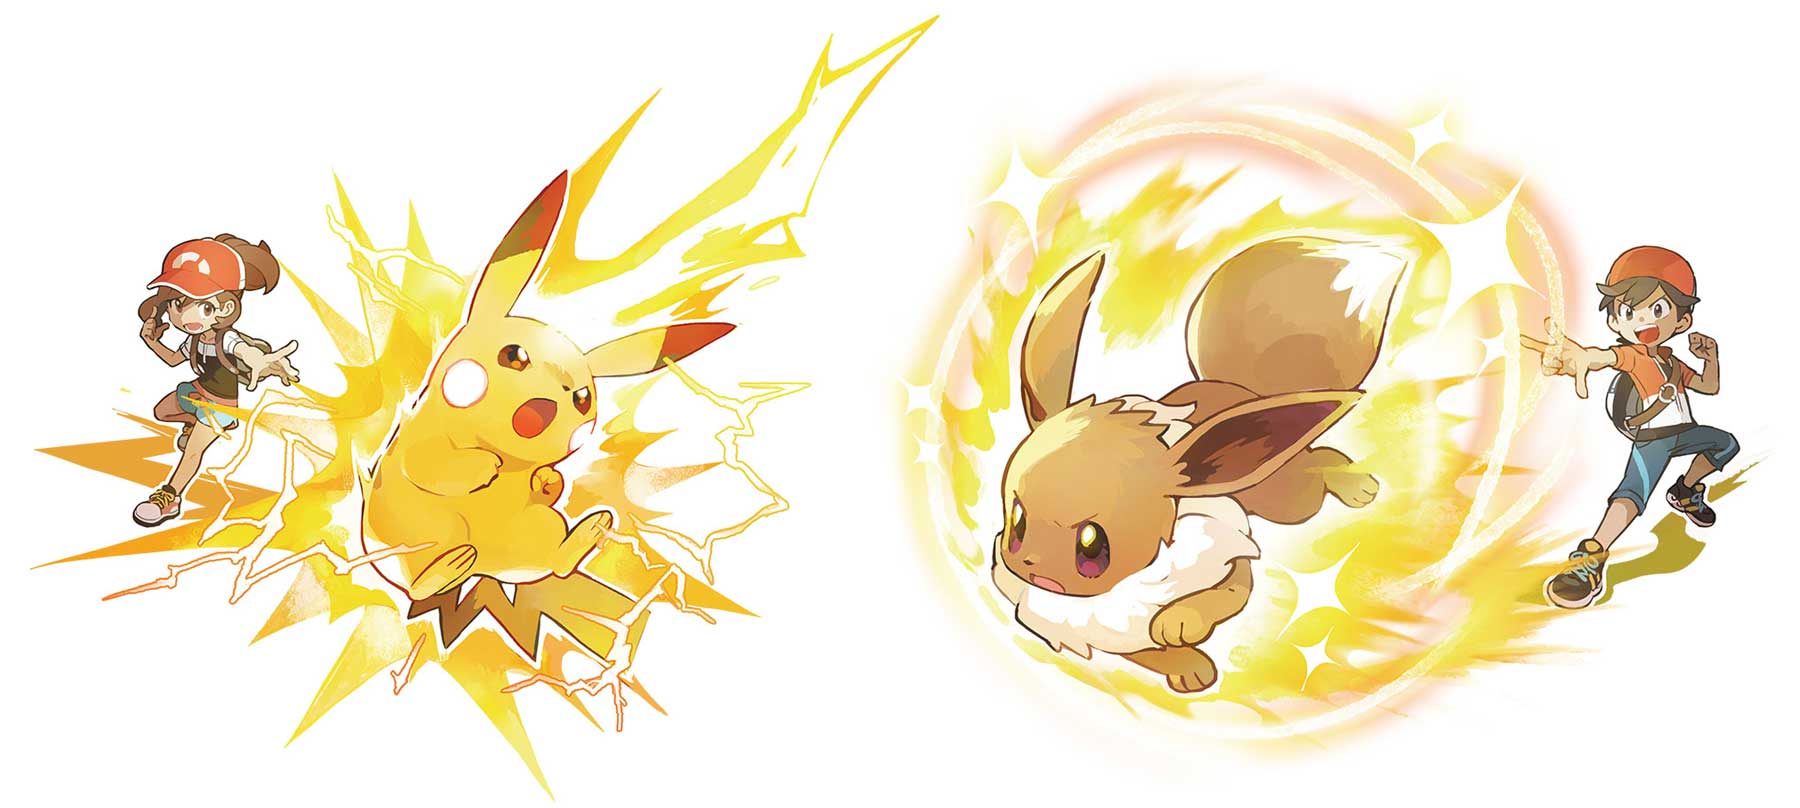 Pokemon: Let’s Go, Pikachu! and Let’s Go, Eevee!